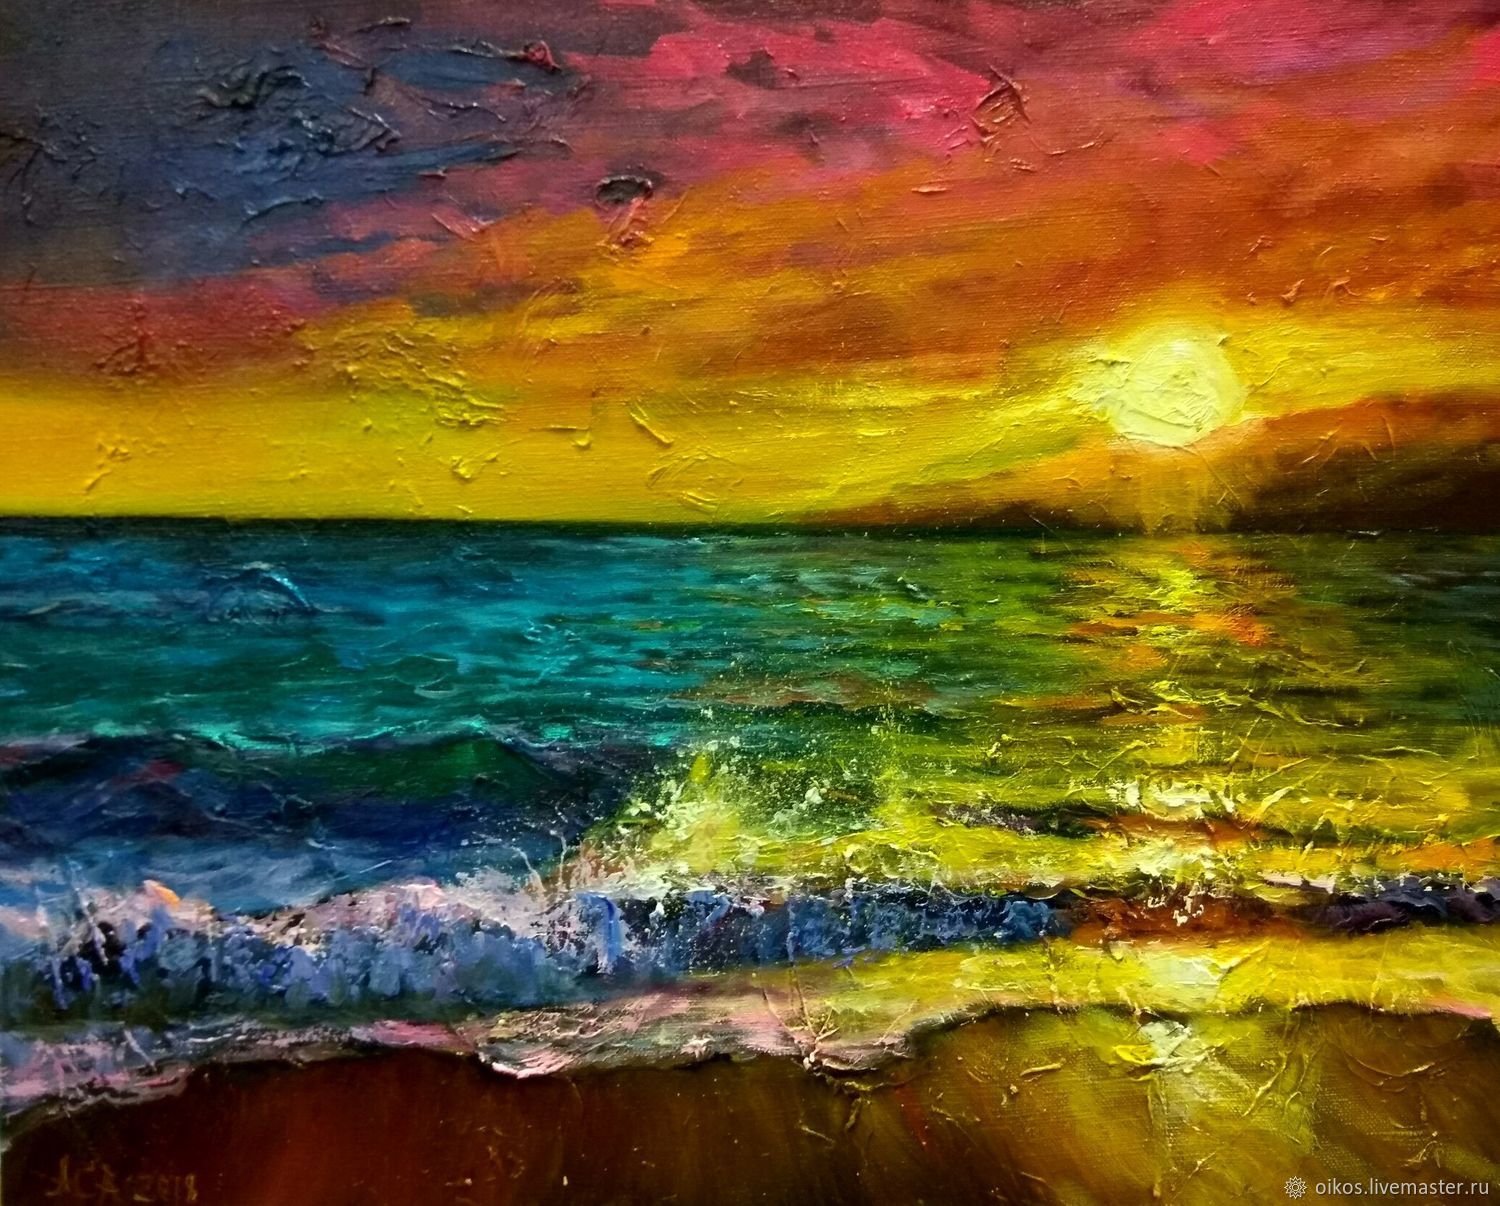 Oil painting with bright sea on the invoice купить на